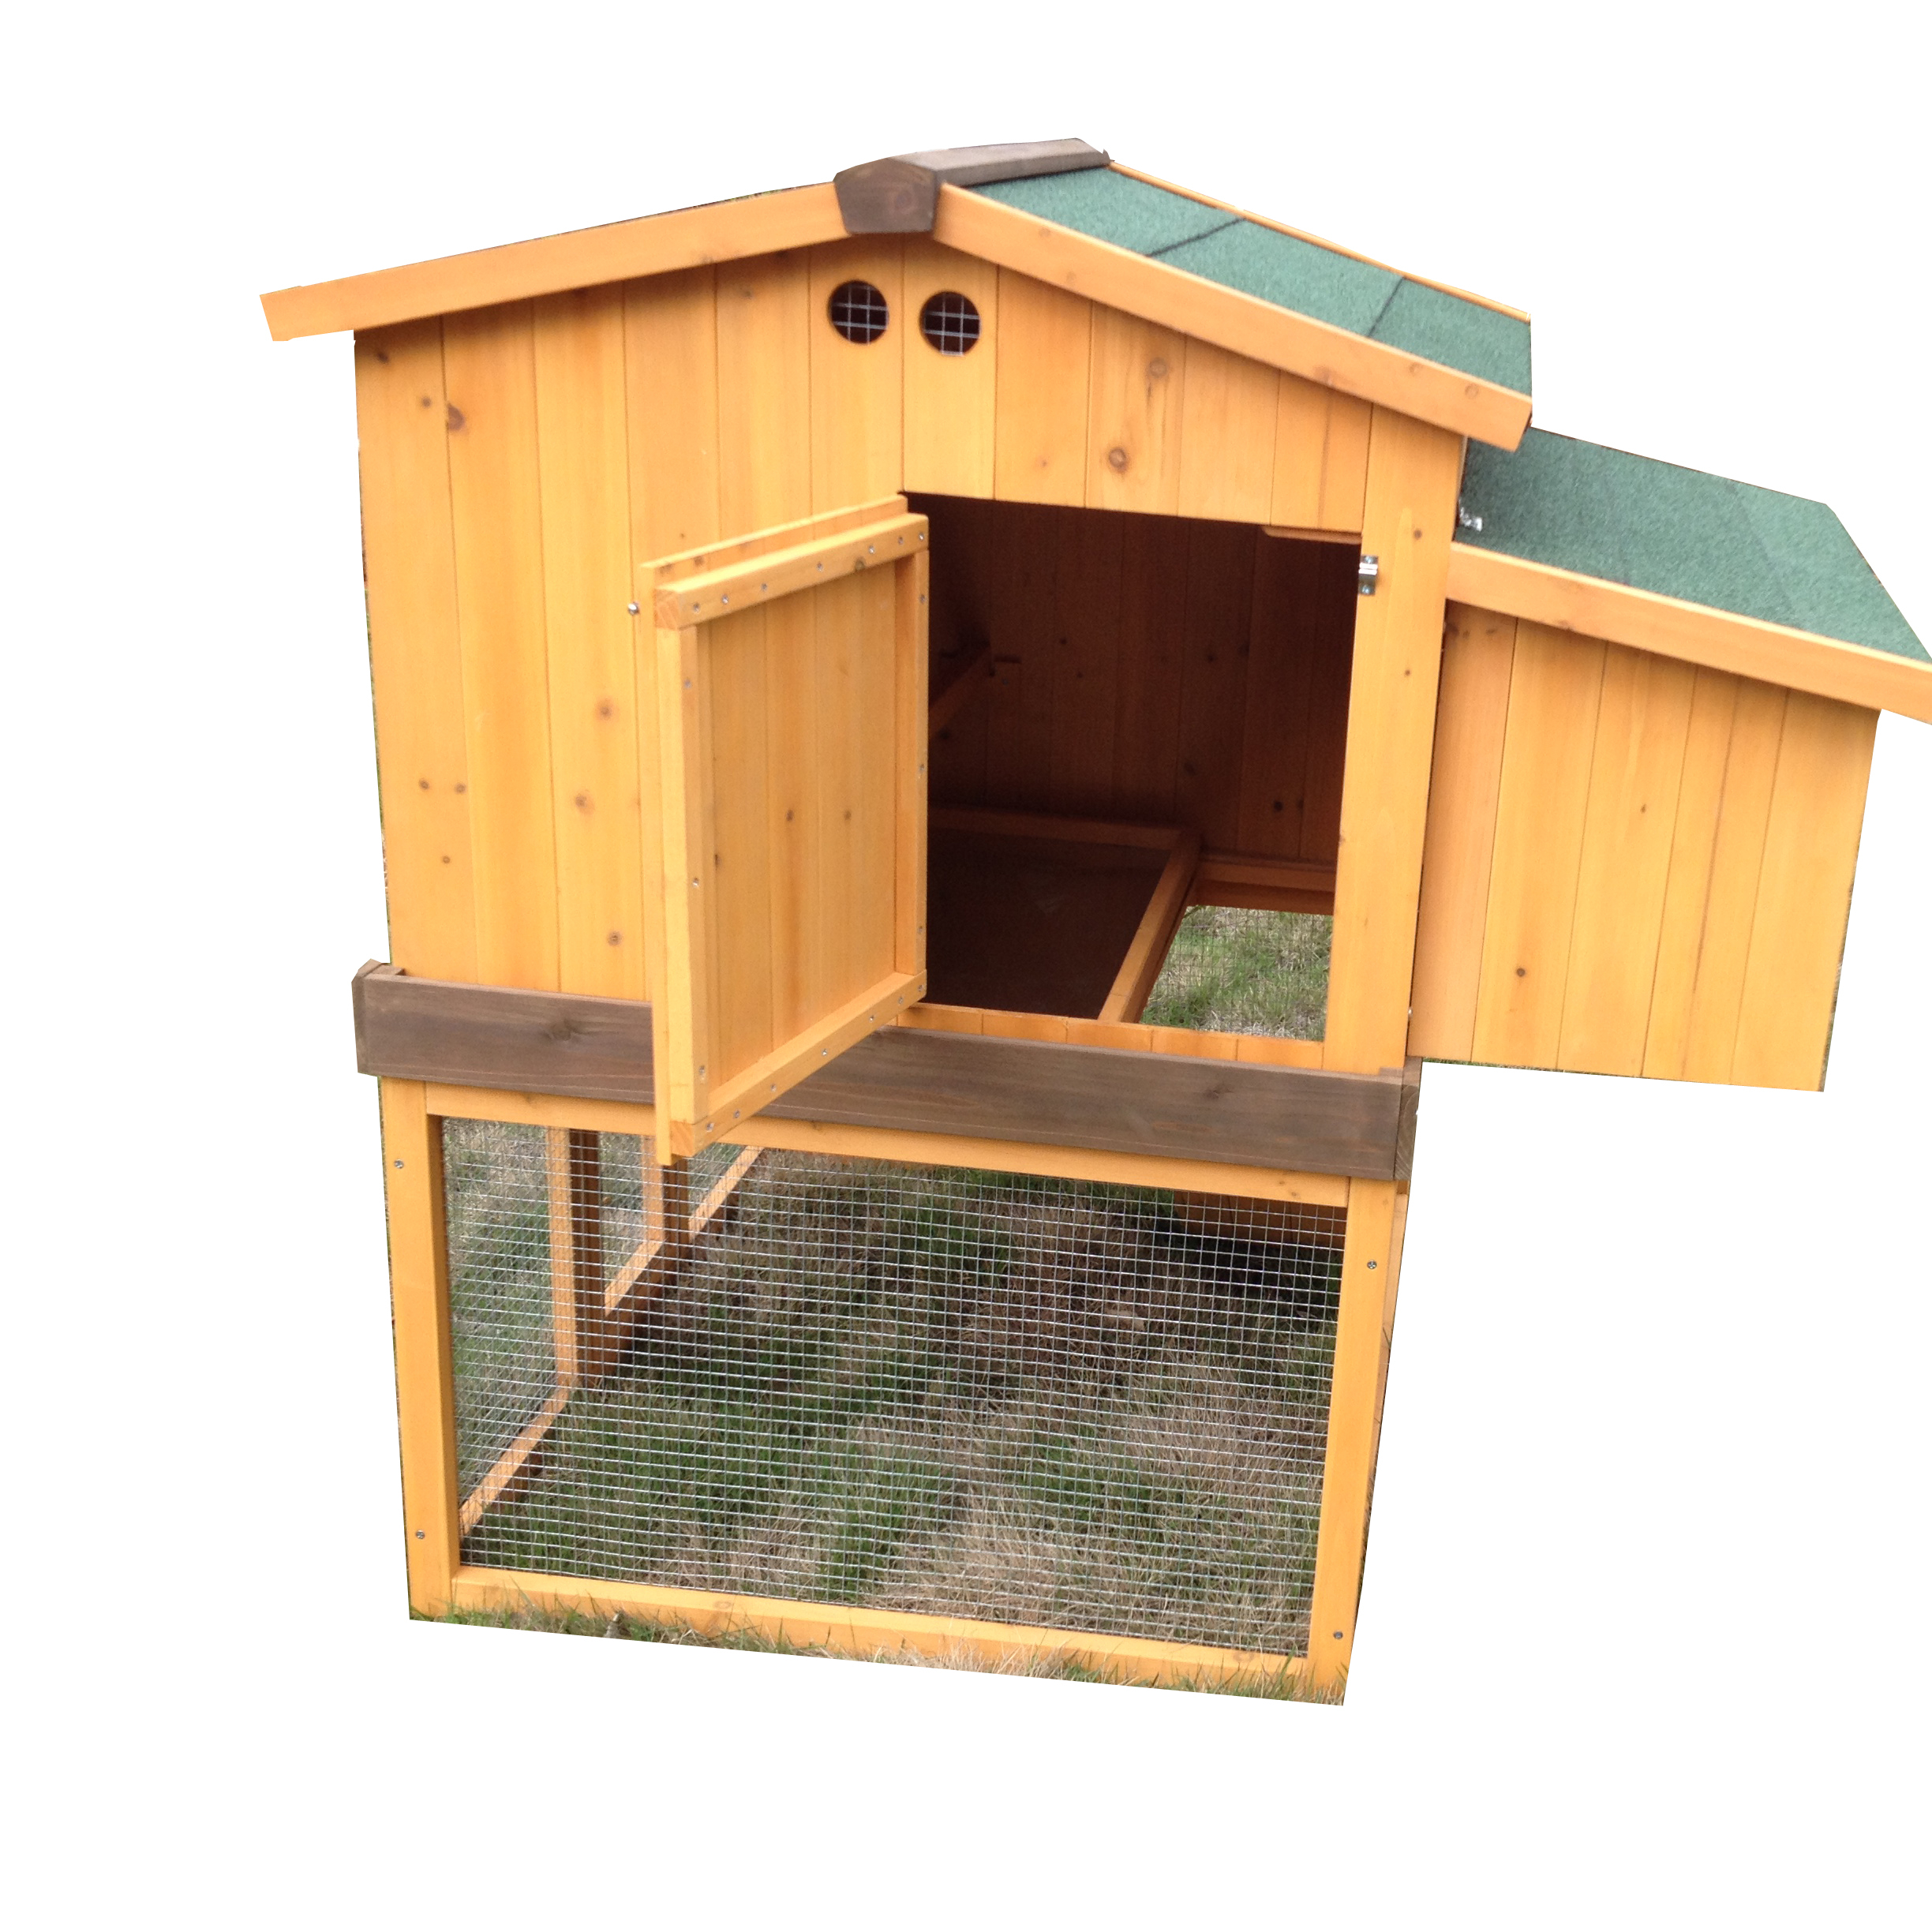 New Fashion Design for Small Chicken Coop -
 High Quality Flat Pack Wooden egg laying Chicken House coop – Easy